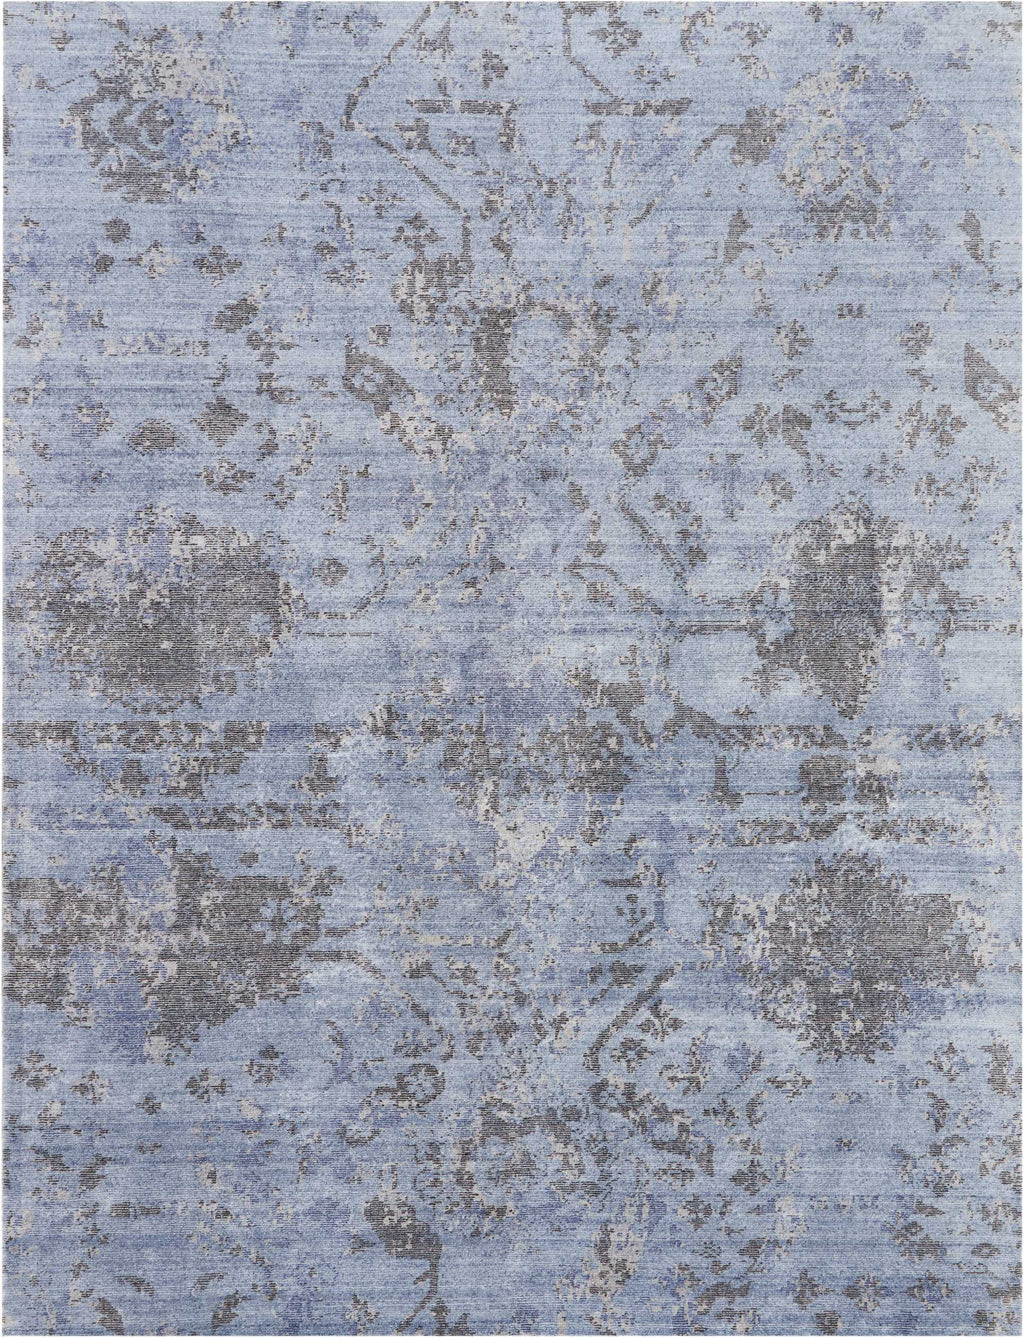 Vintage-inspired distressed blue carpet with intricate floral motifs.